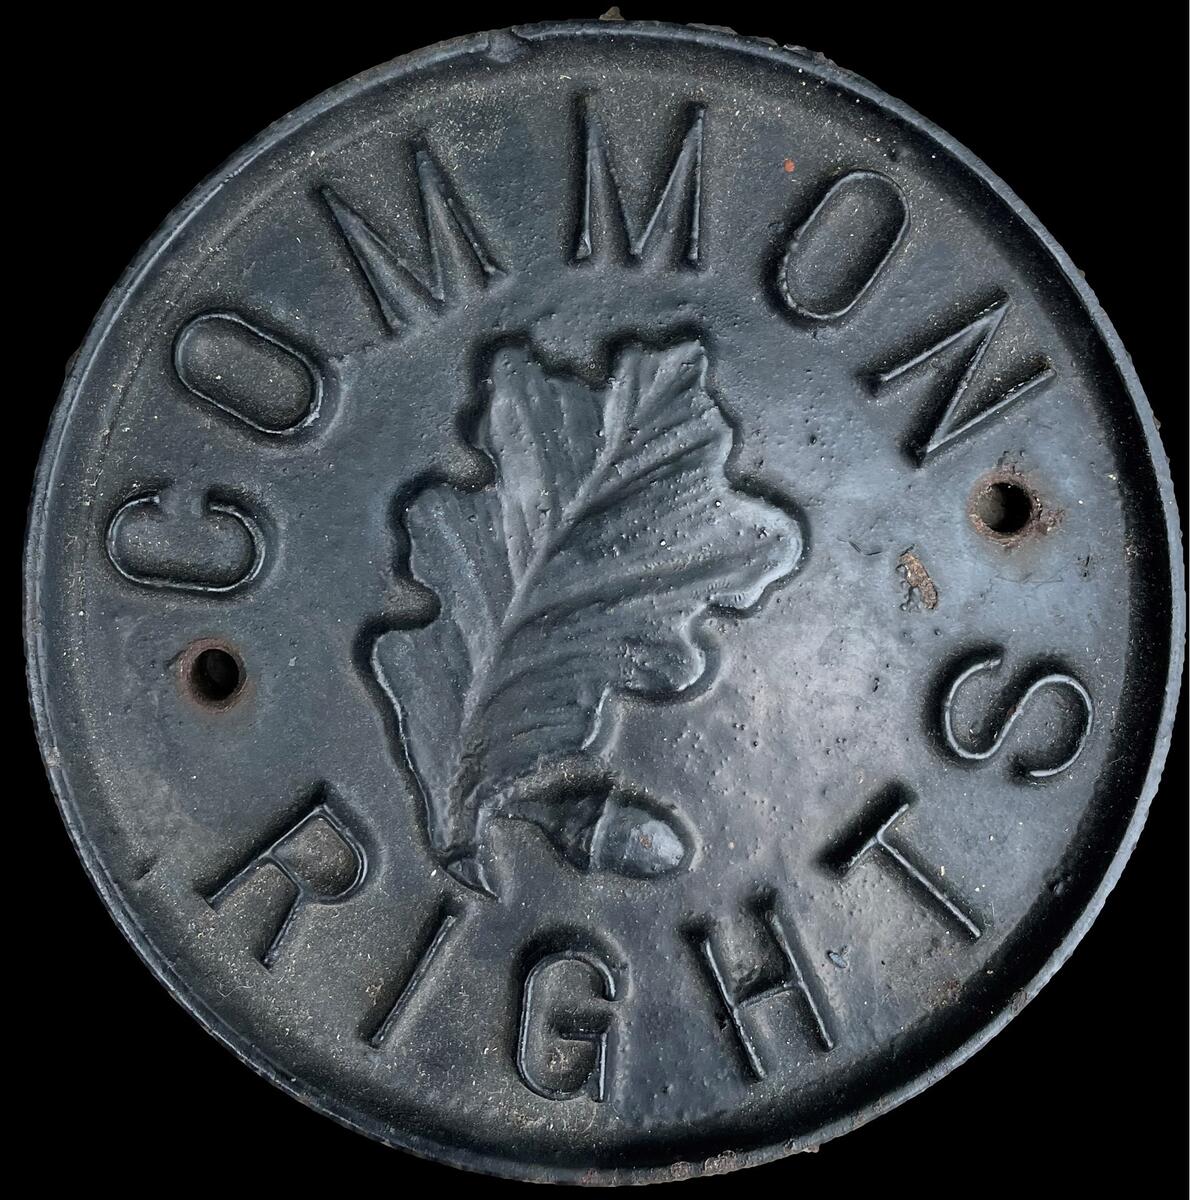 Common Rights plaques were made in the Bucklebury Foundry